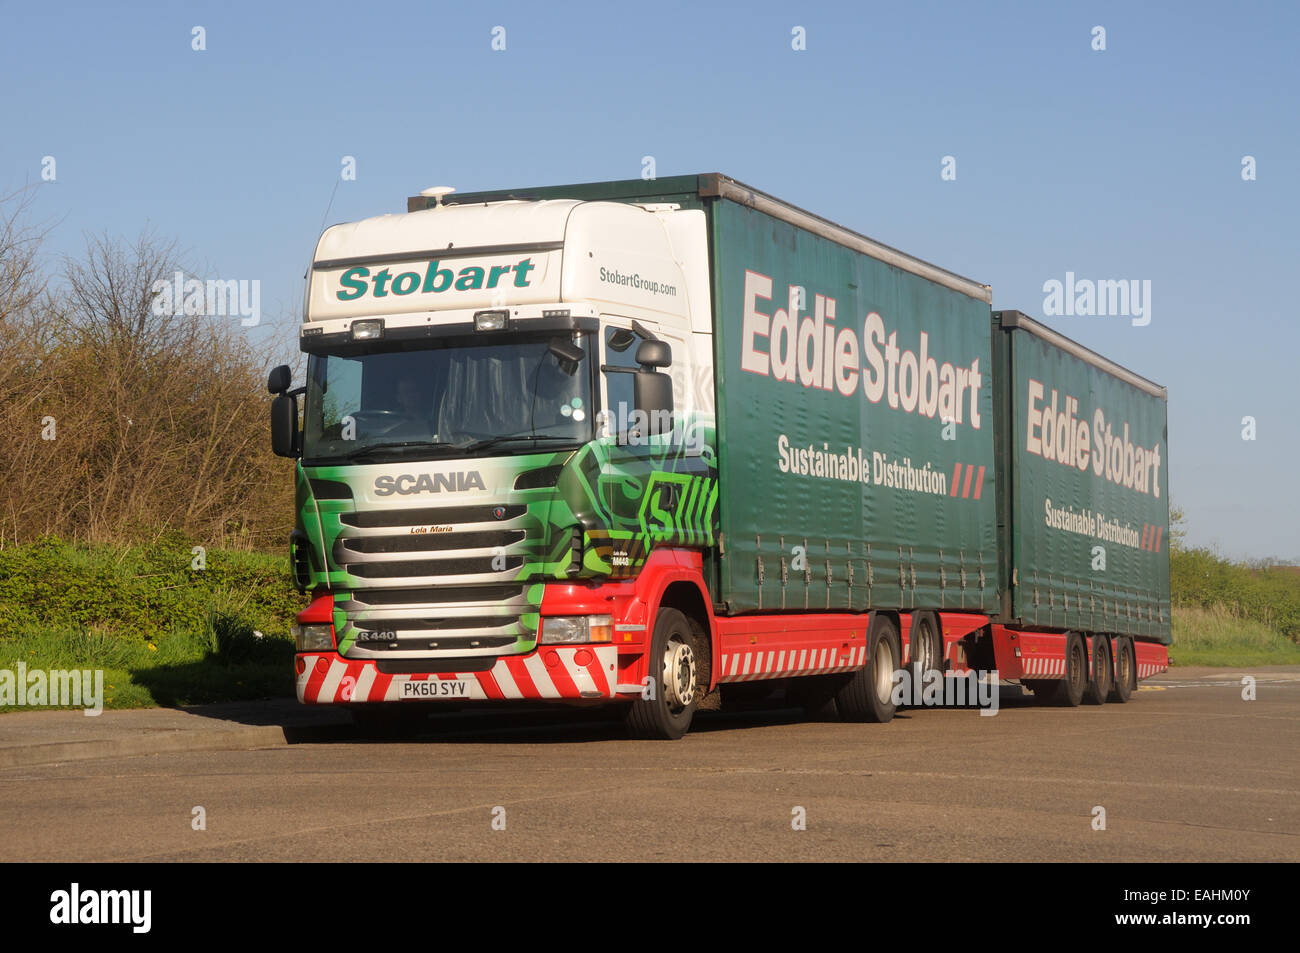 A Scania R440 lorry and trailer in Eddie Stobart livery in Leicester, Leicestershire, England Stock Photo